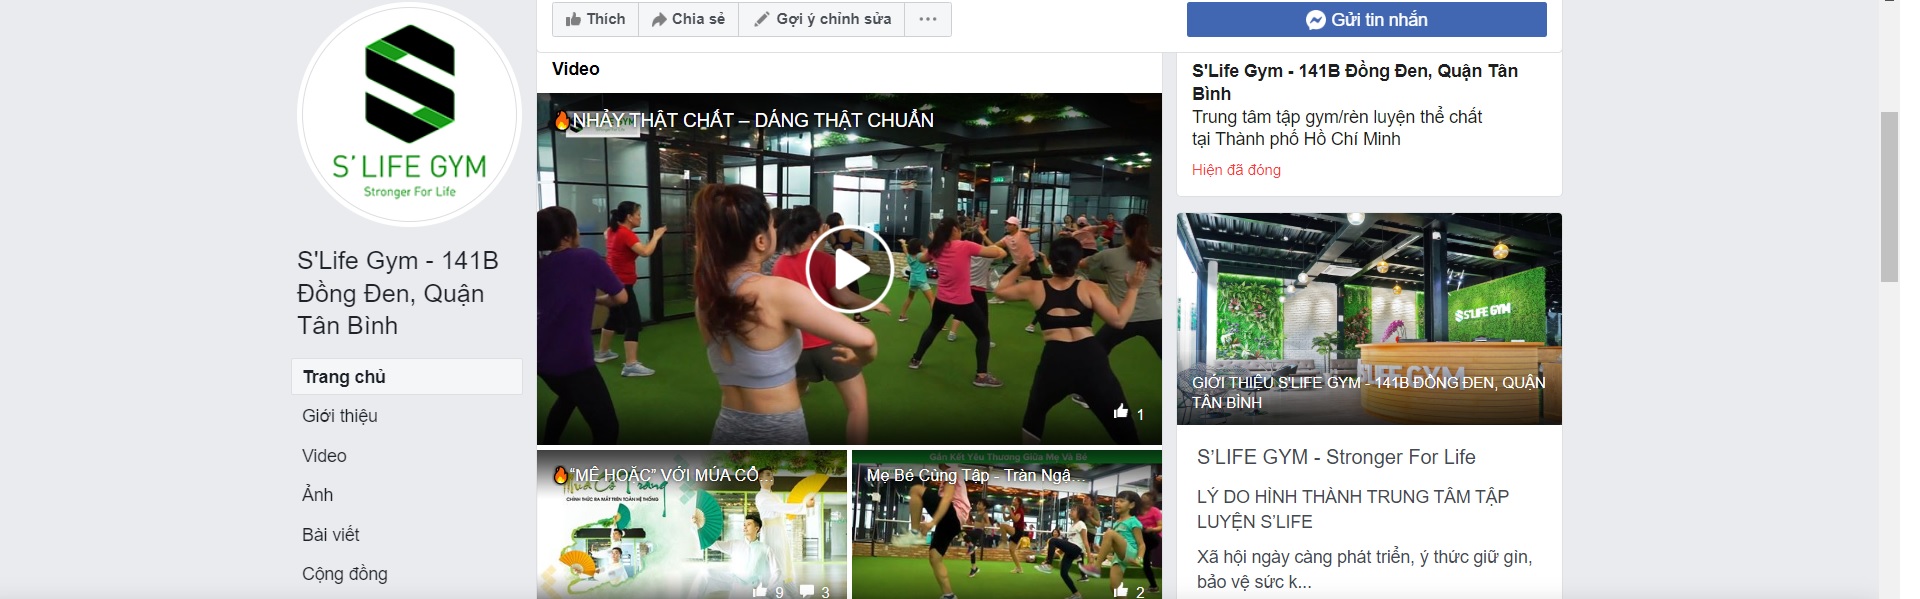 Ảnh CAN NHUONG THE TAP GYM - TRUNG TAM S'LIFE GYM